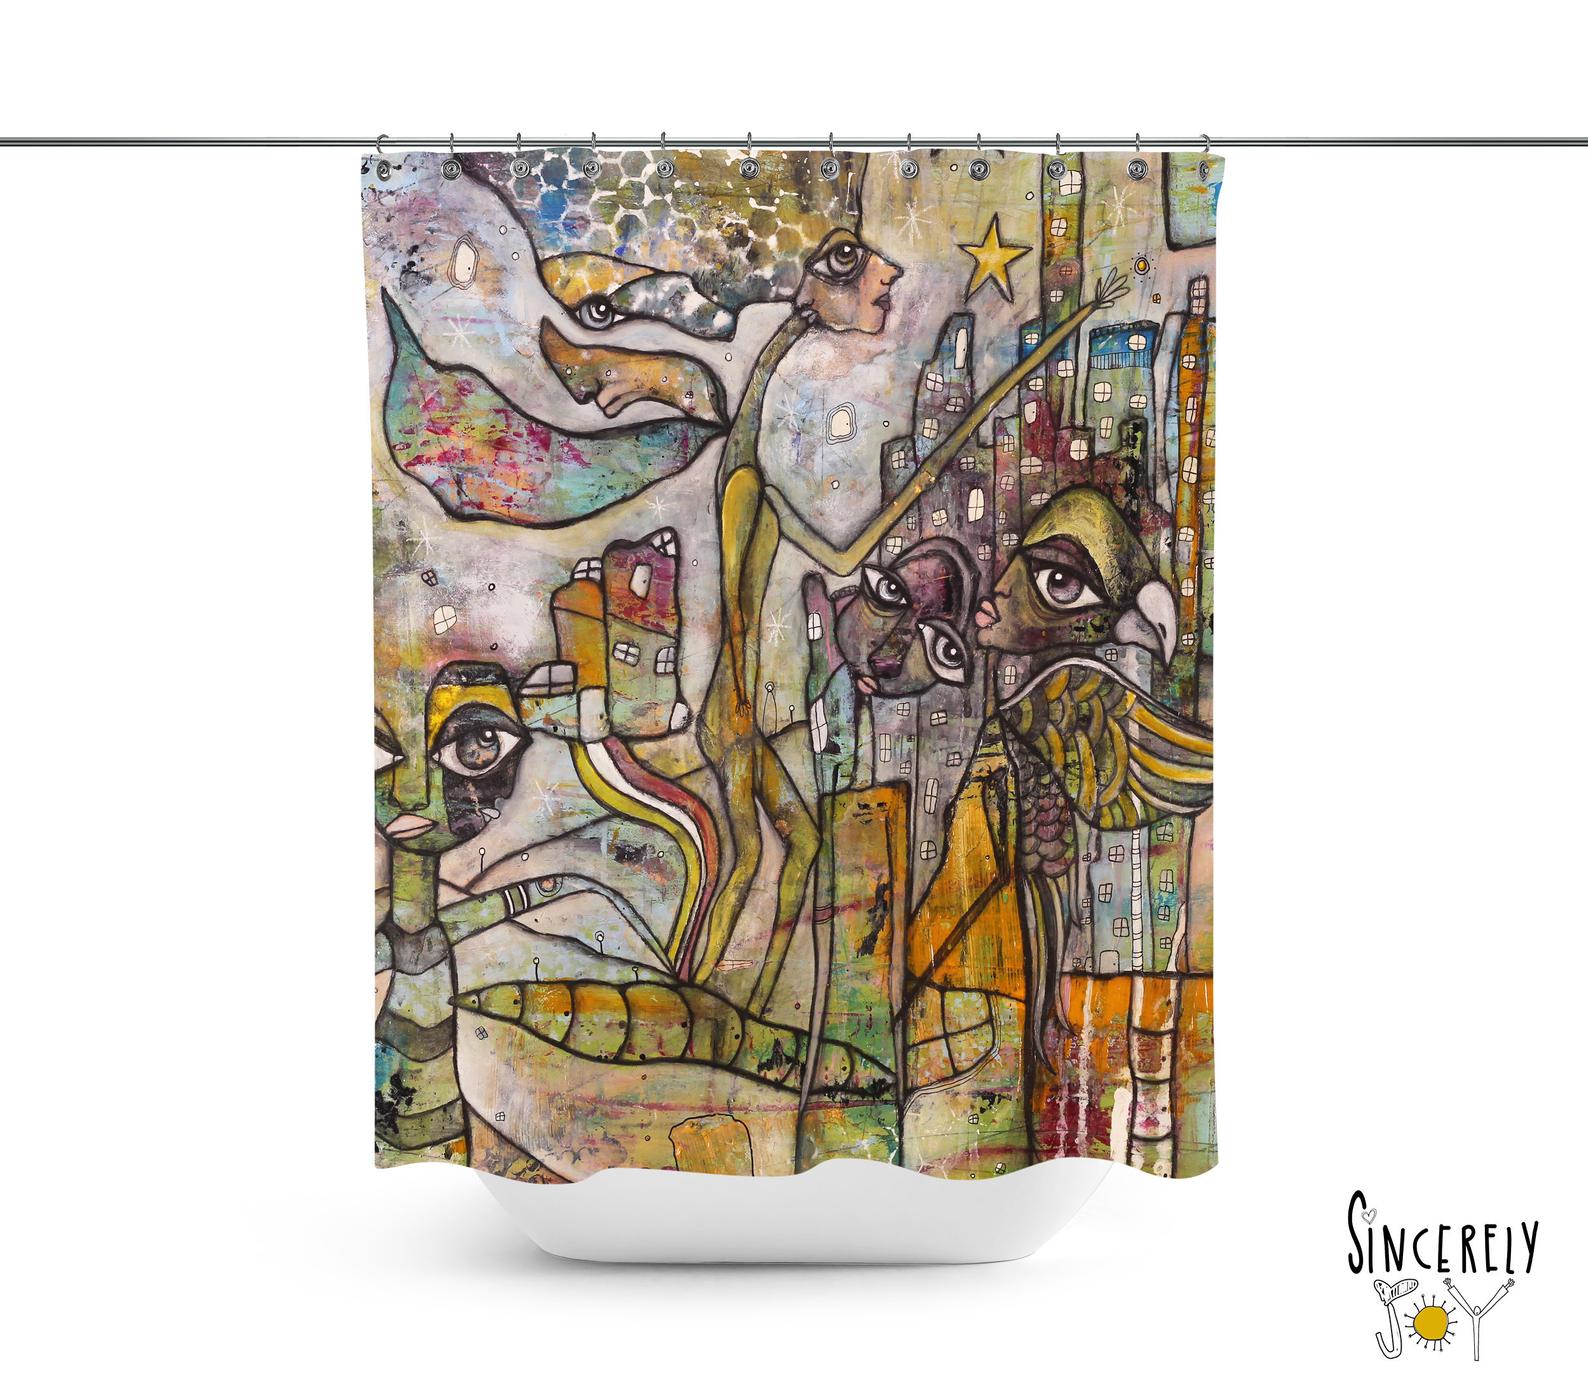 Abstract Mixed Media Shower Curtain 'City Creatures'